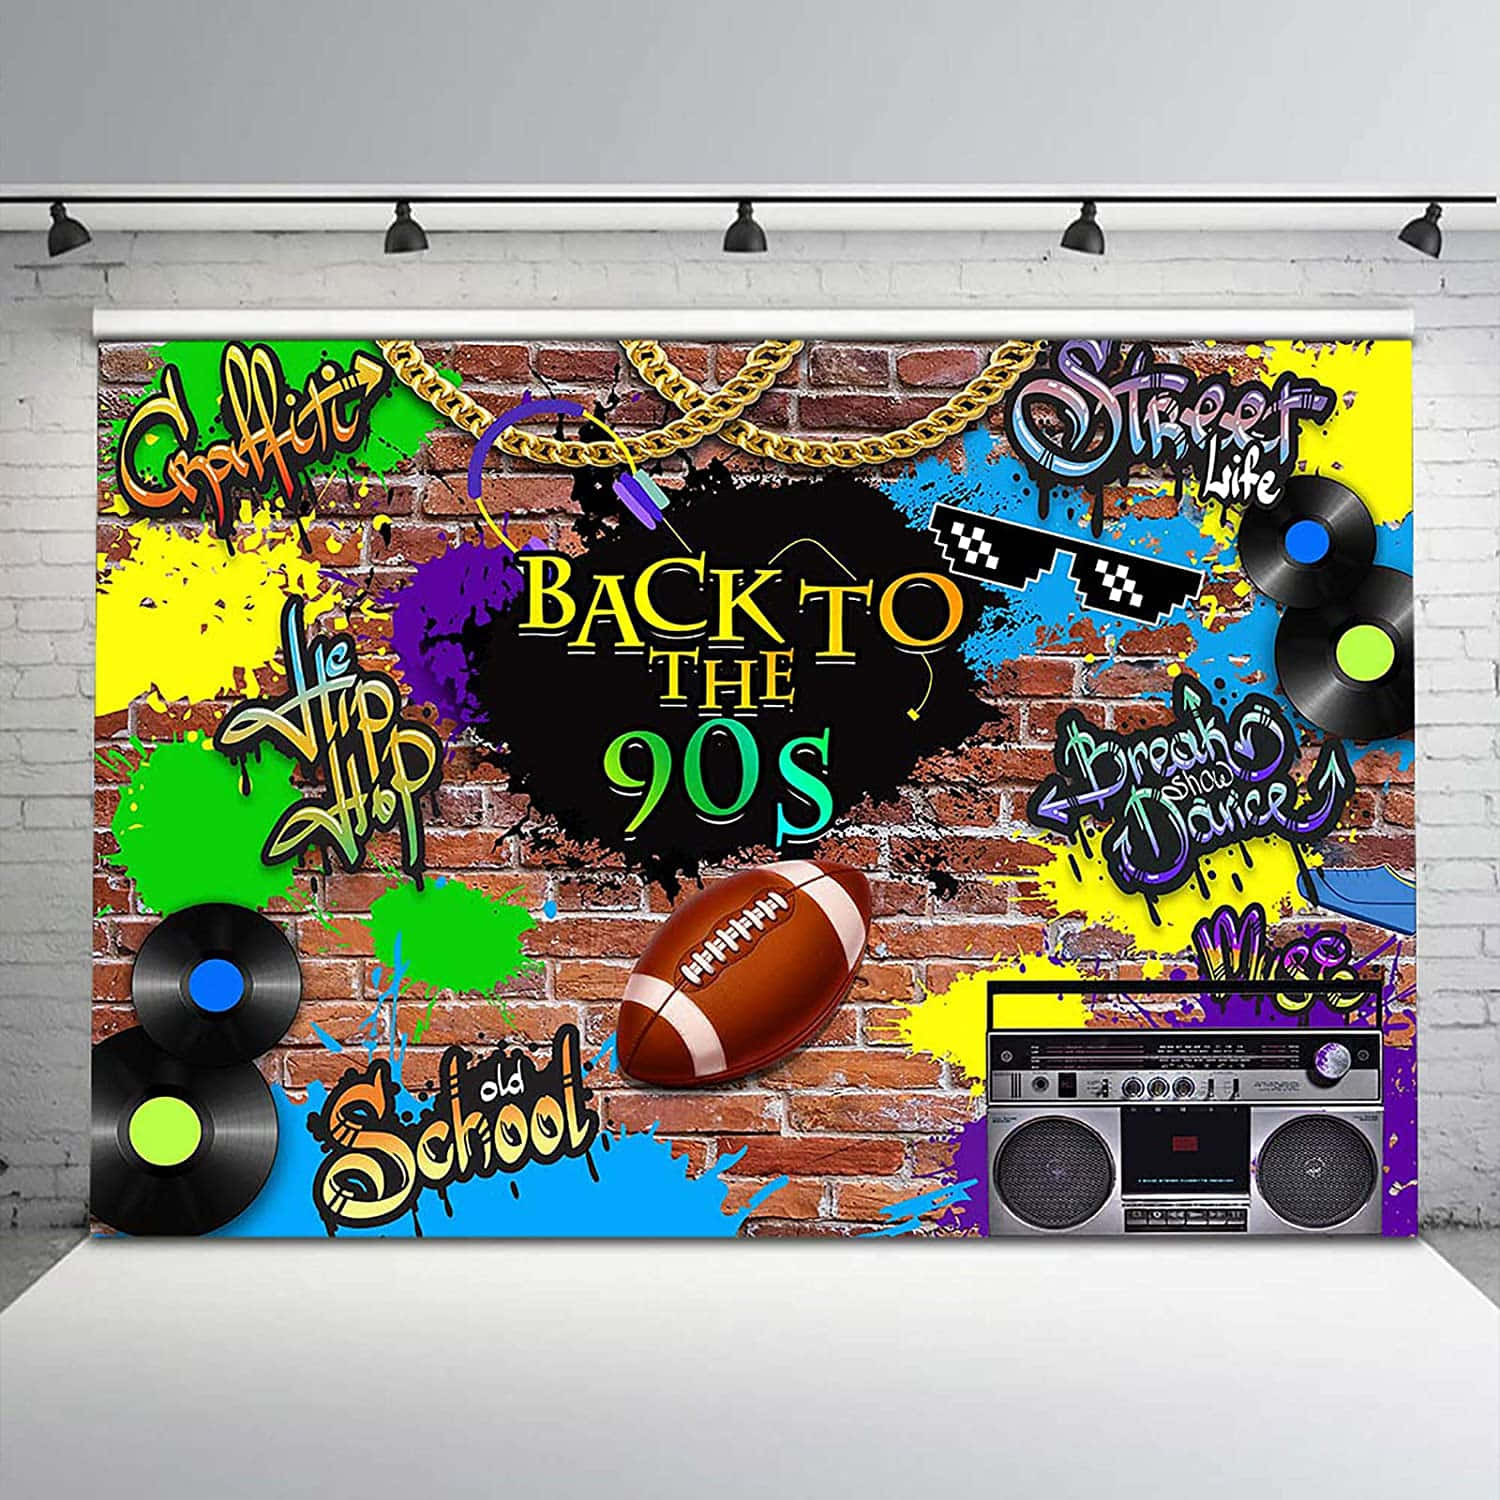 Relive the nostalgia of the 90s.